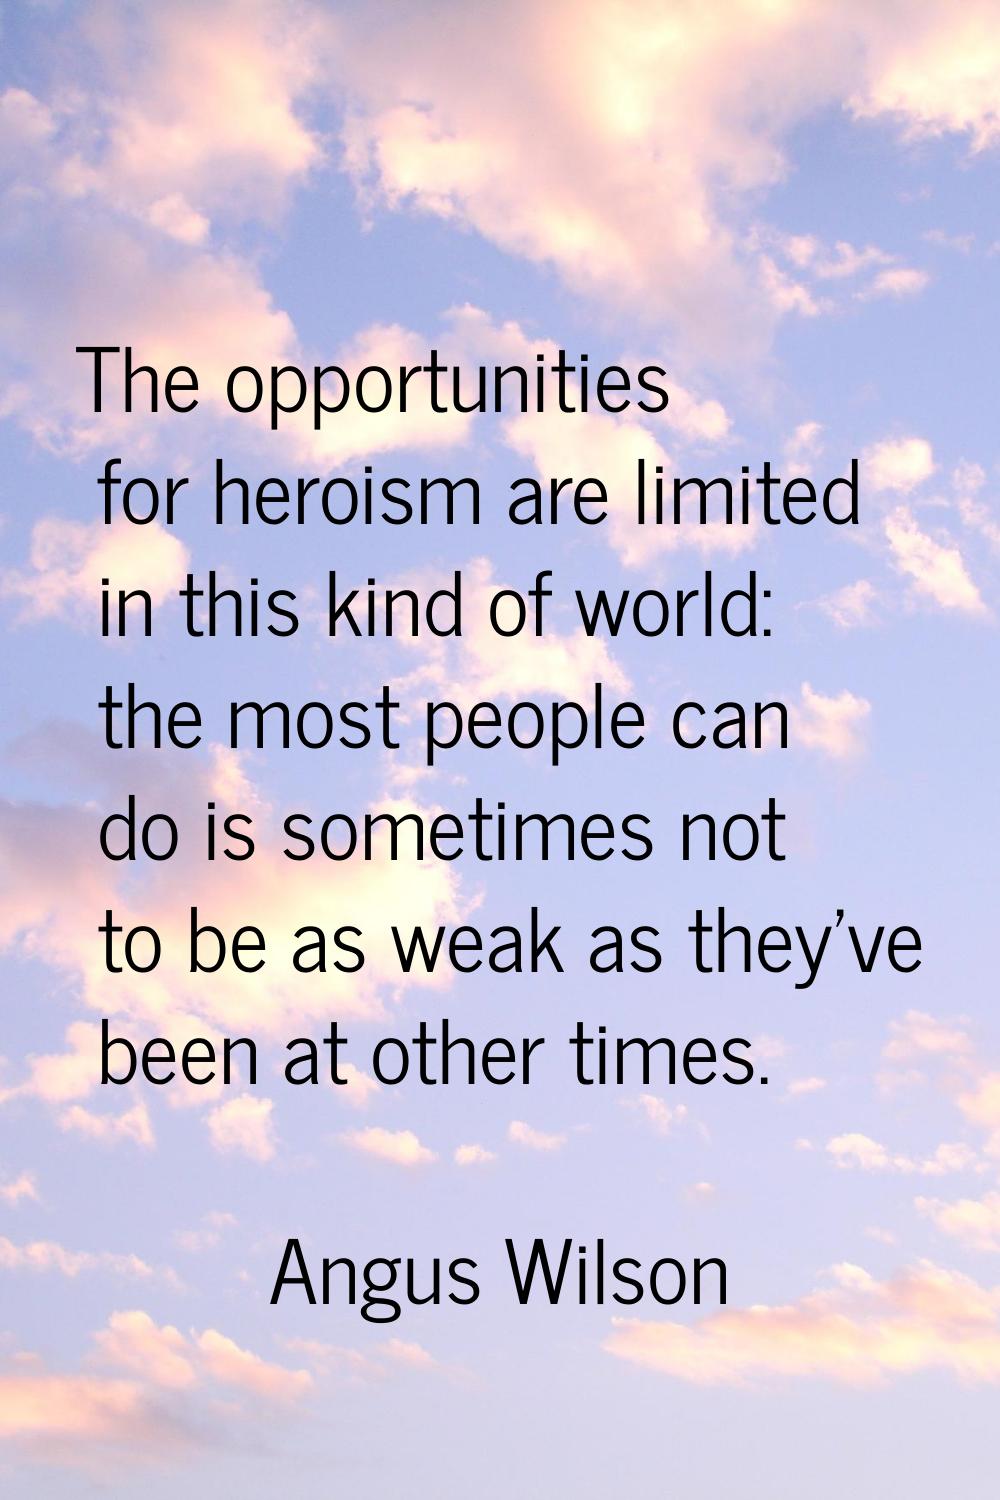 The opportunities for heroism are limited in this kind of world: the most people can do is sometime